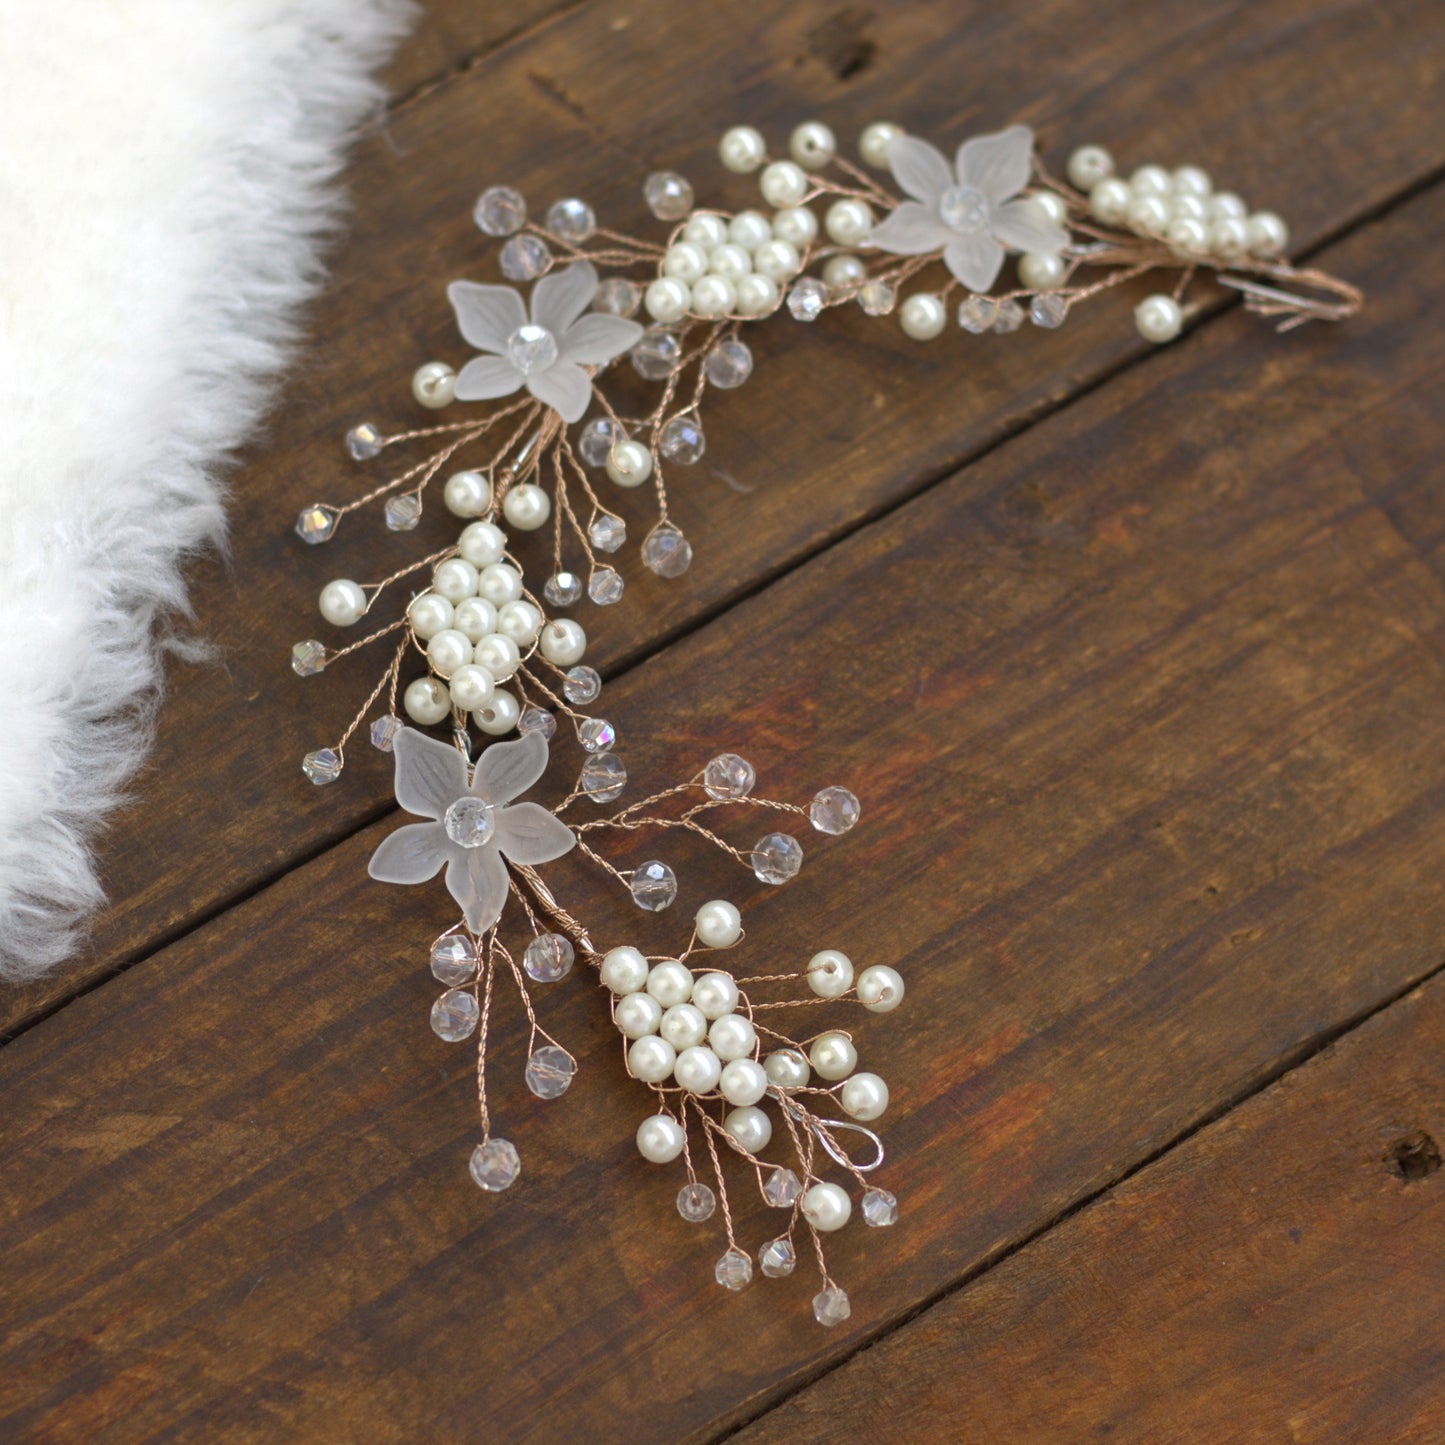 Flexible Crystal Flower with Pearls Artificial Hair Bun Flower Accessory